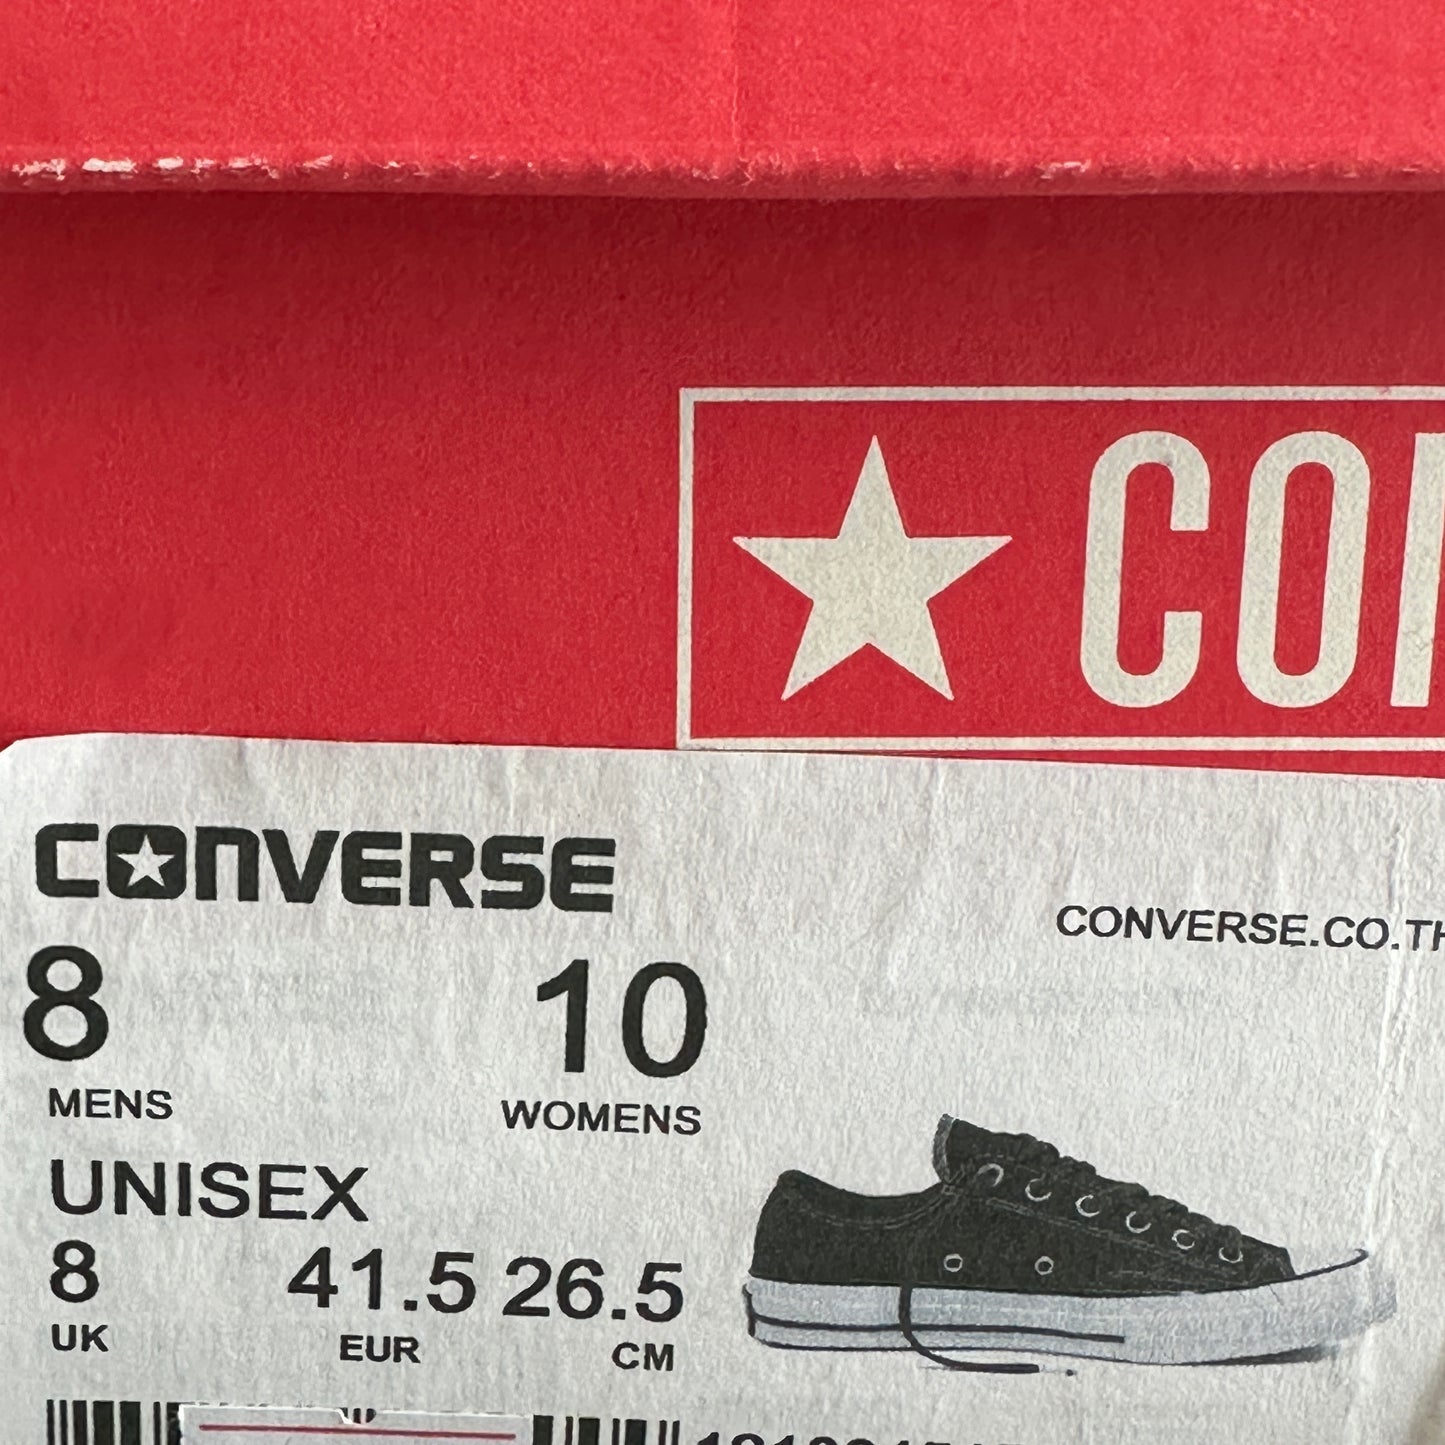 Converse All Star Chuck Taylor 70's x Fragment Design Shoes